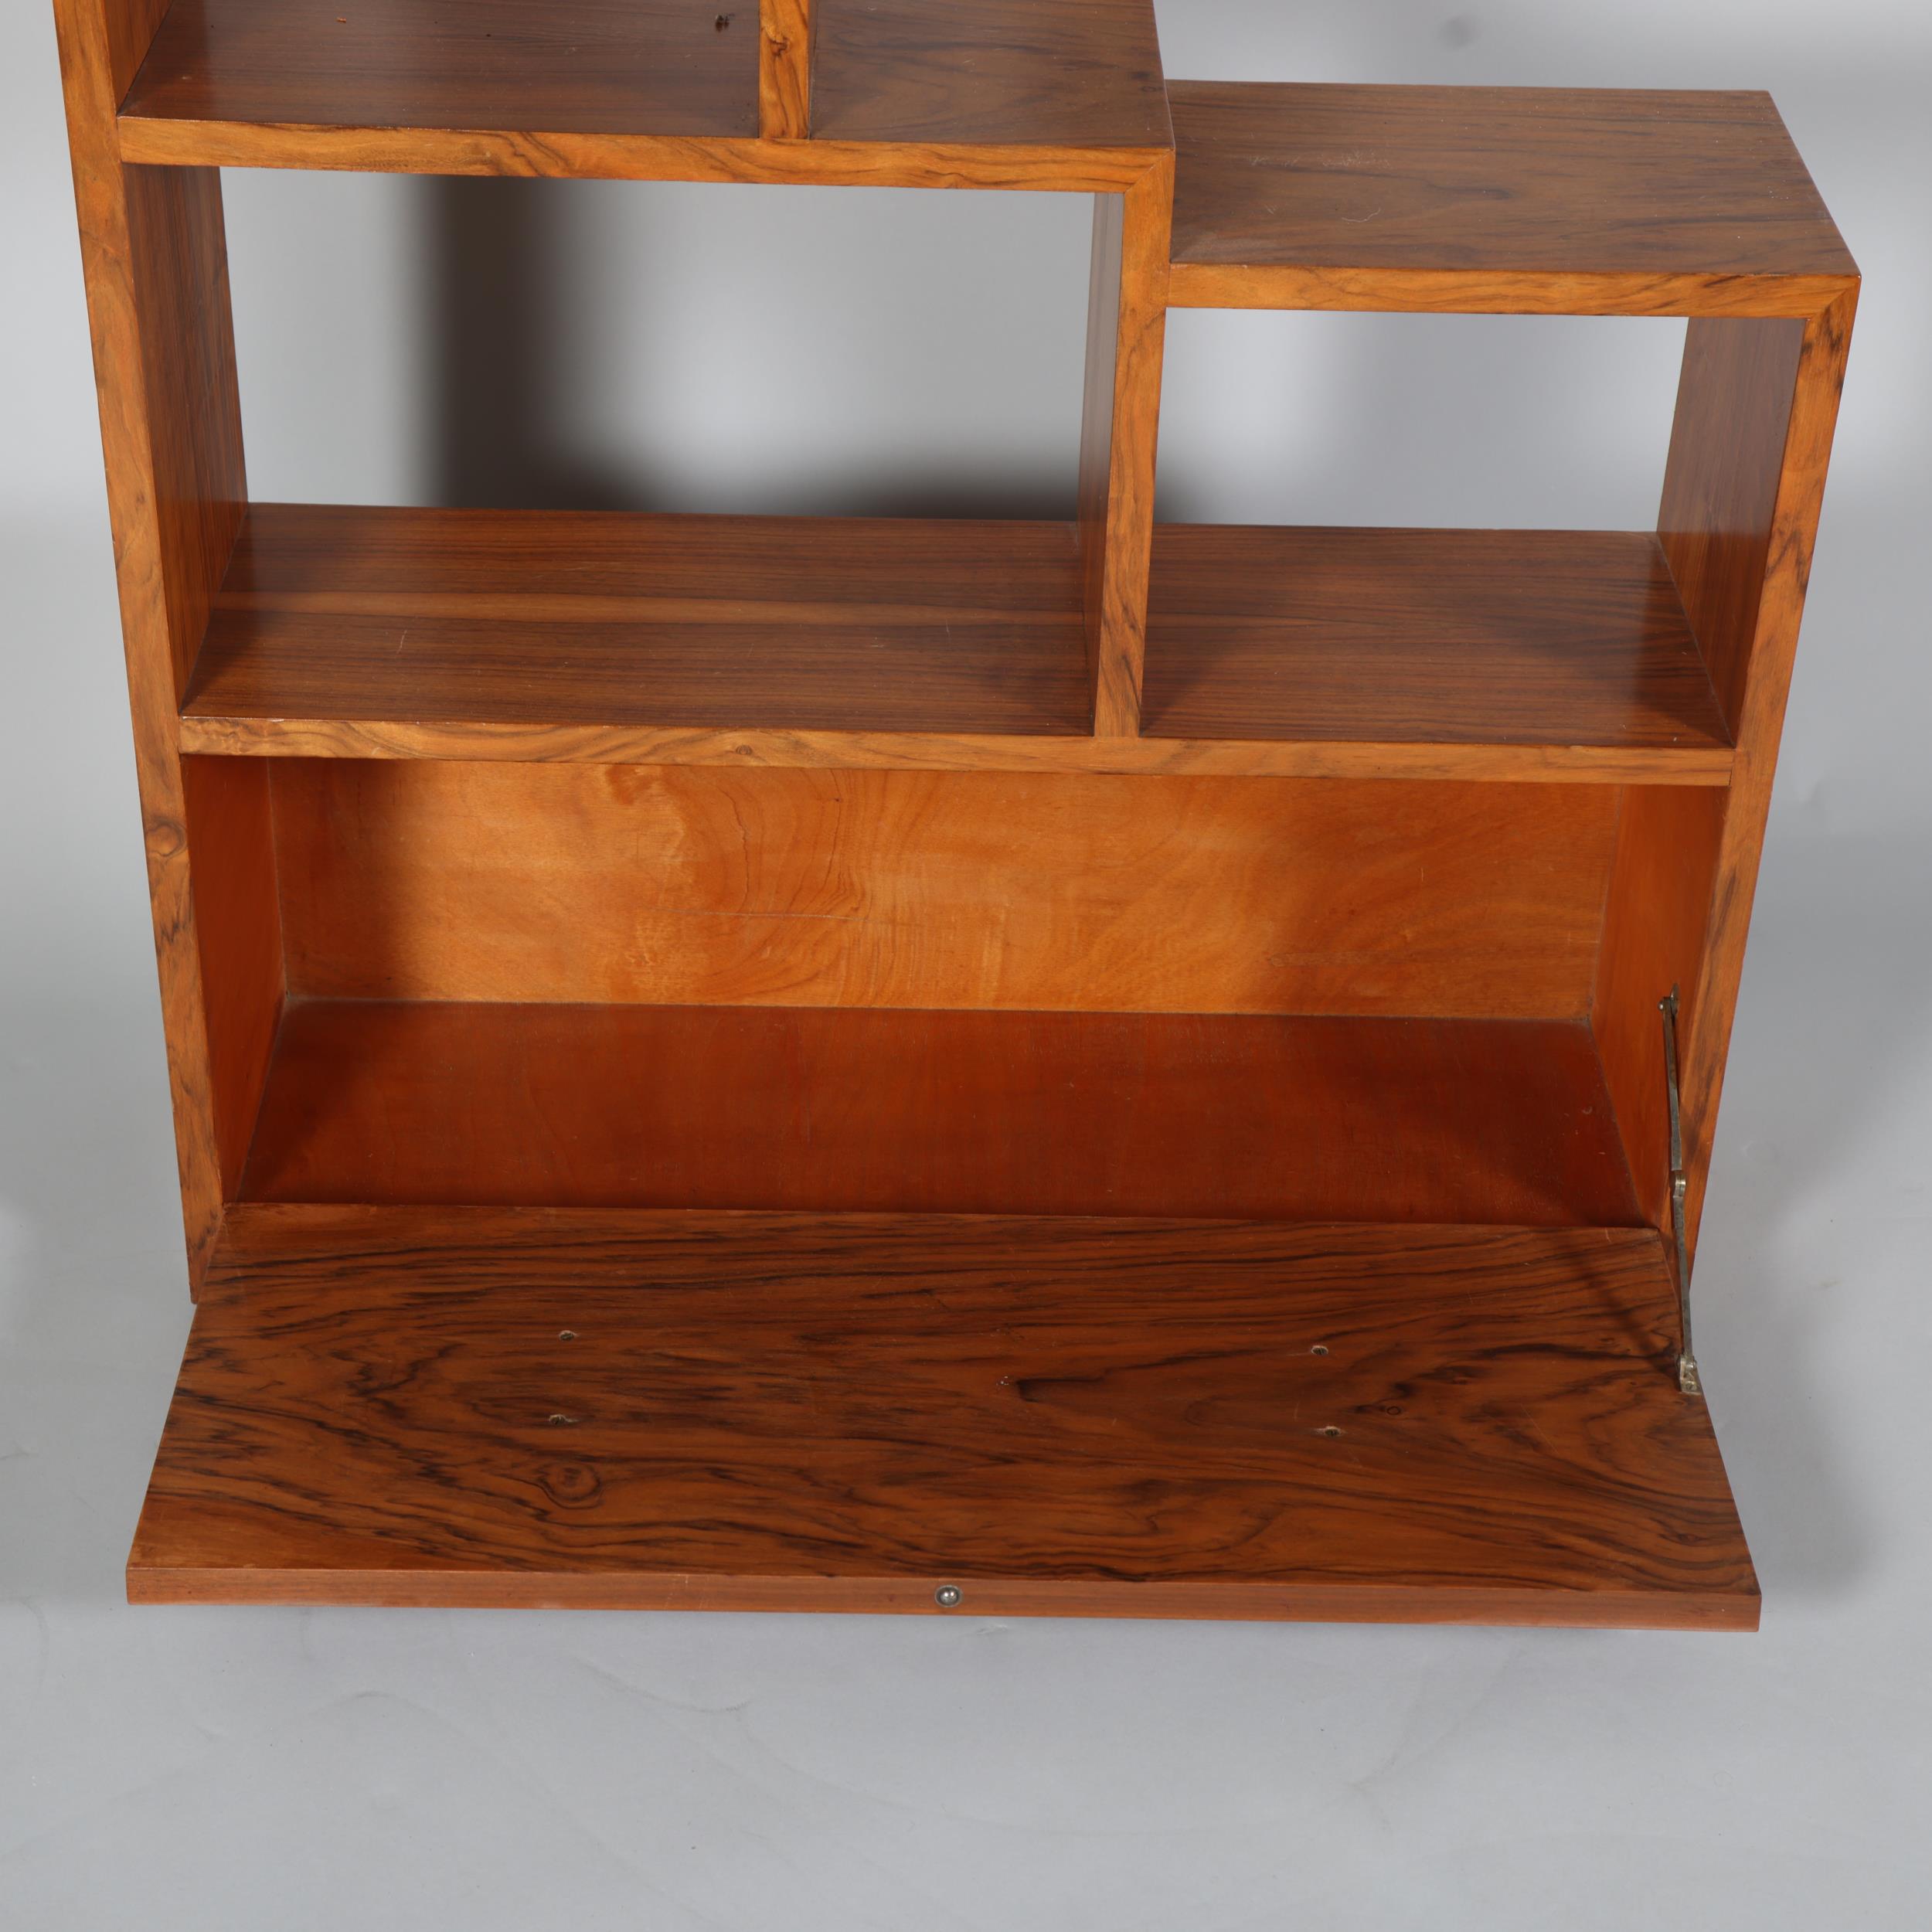 Art Deco walnut stepped open bookcase with drop-front cupboard below, width 77cm, height 107cm - Image 3 of 4